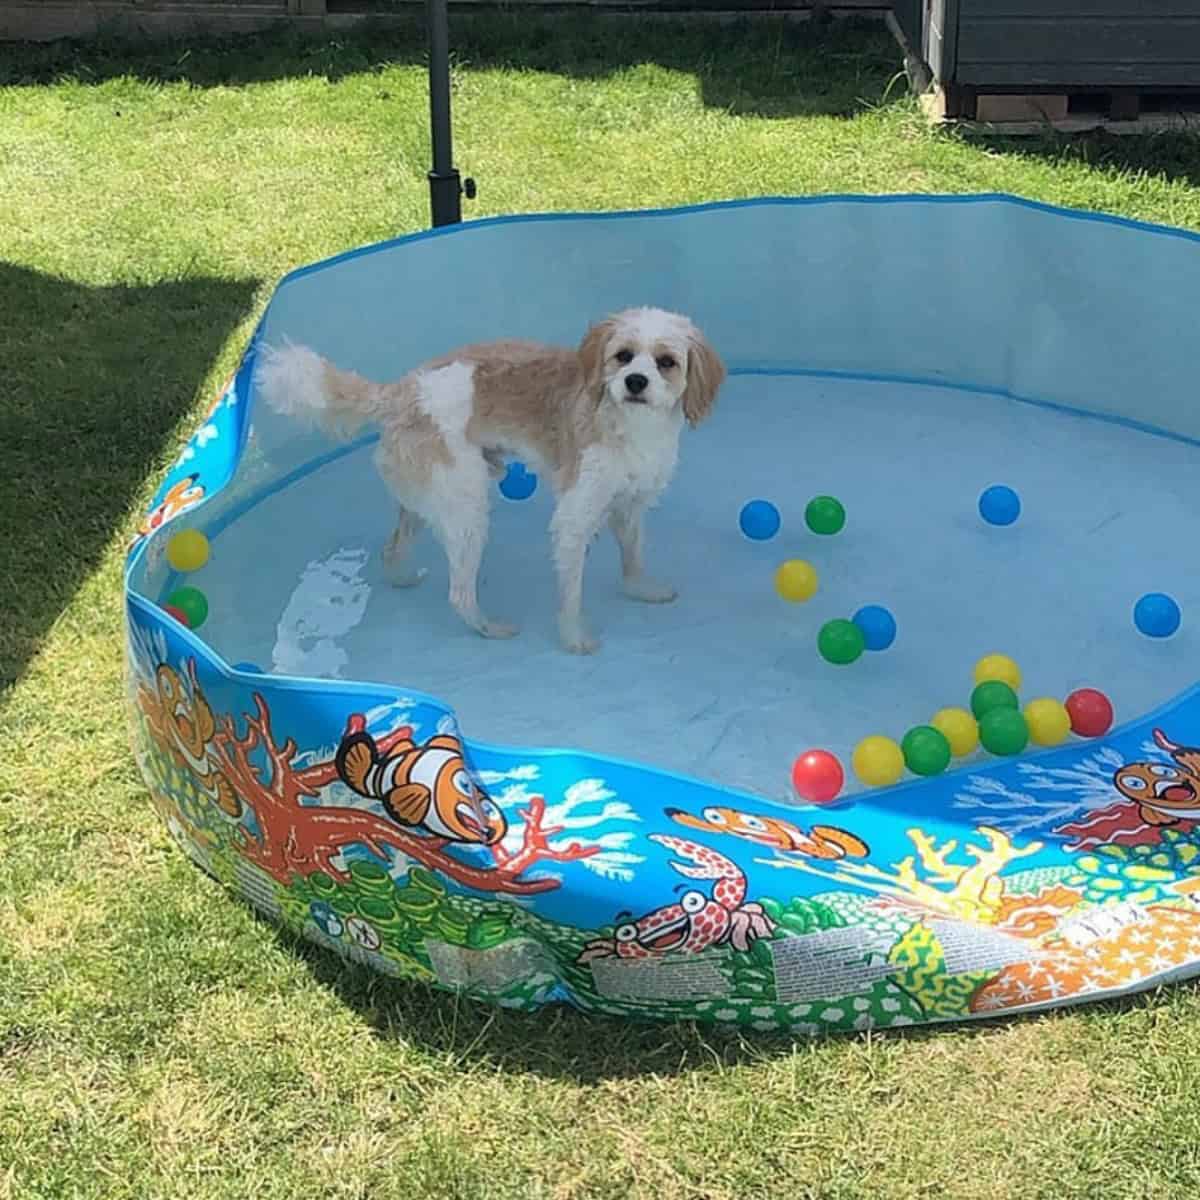 Cavapoo with its pool